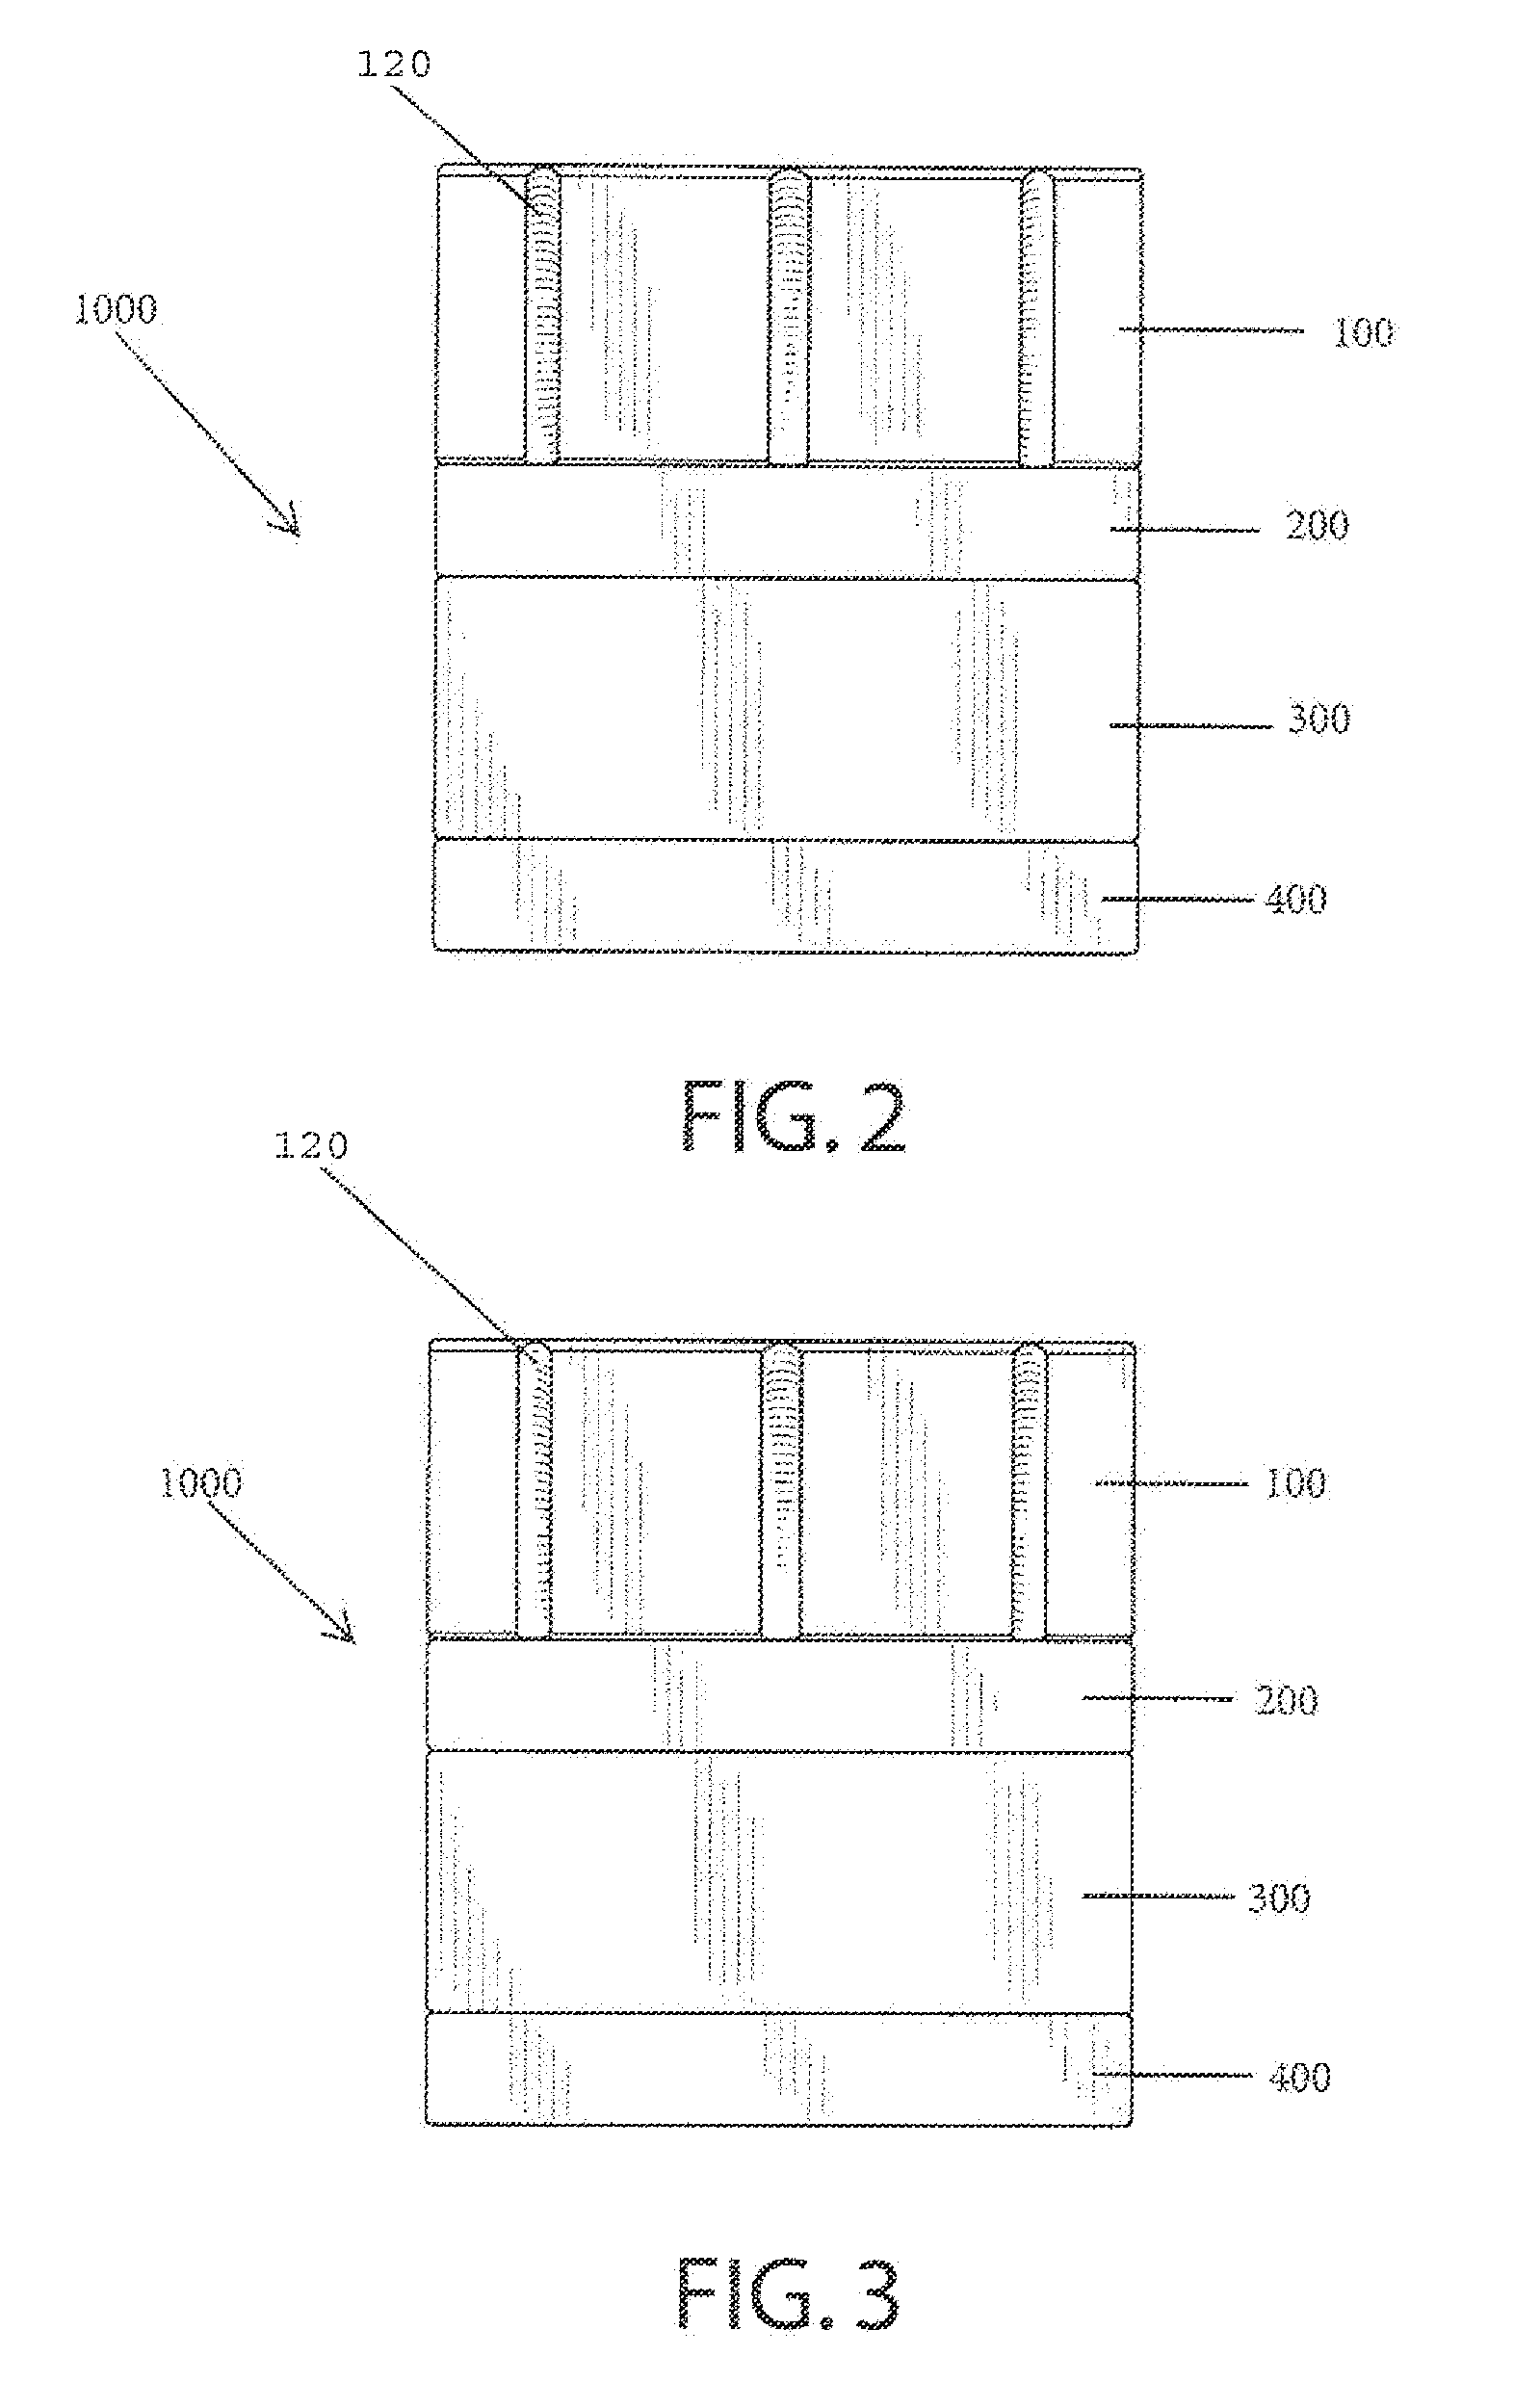 Apparatus for herb grinding and related methods